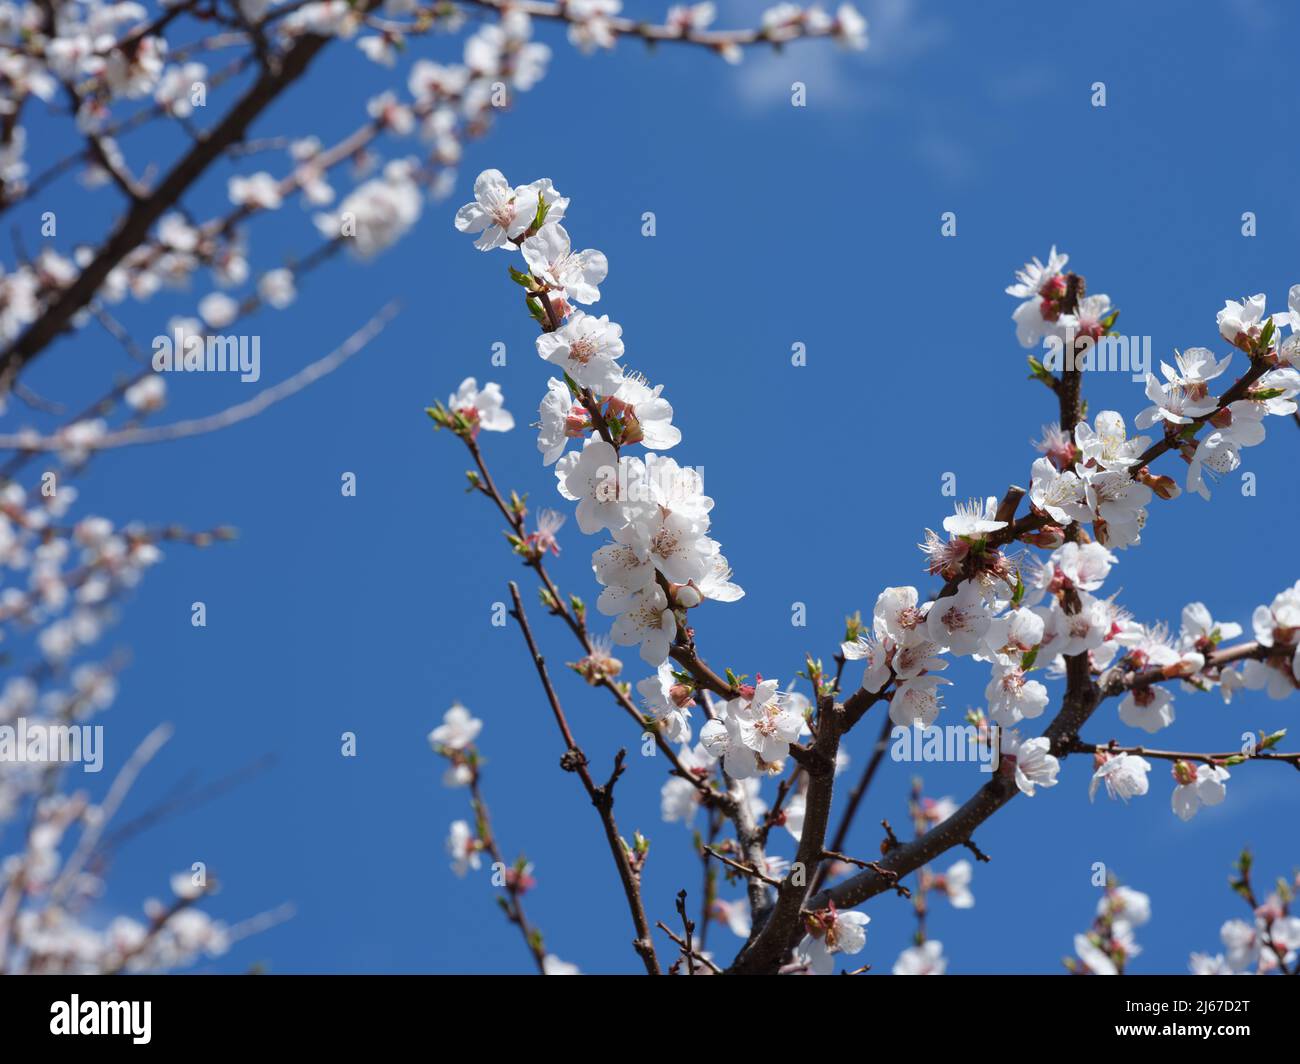 An apricot tree canopy with many branches that have apricot tree blossoms on them. Closeup. Stock Photo